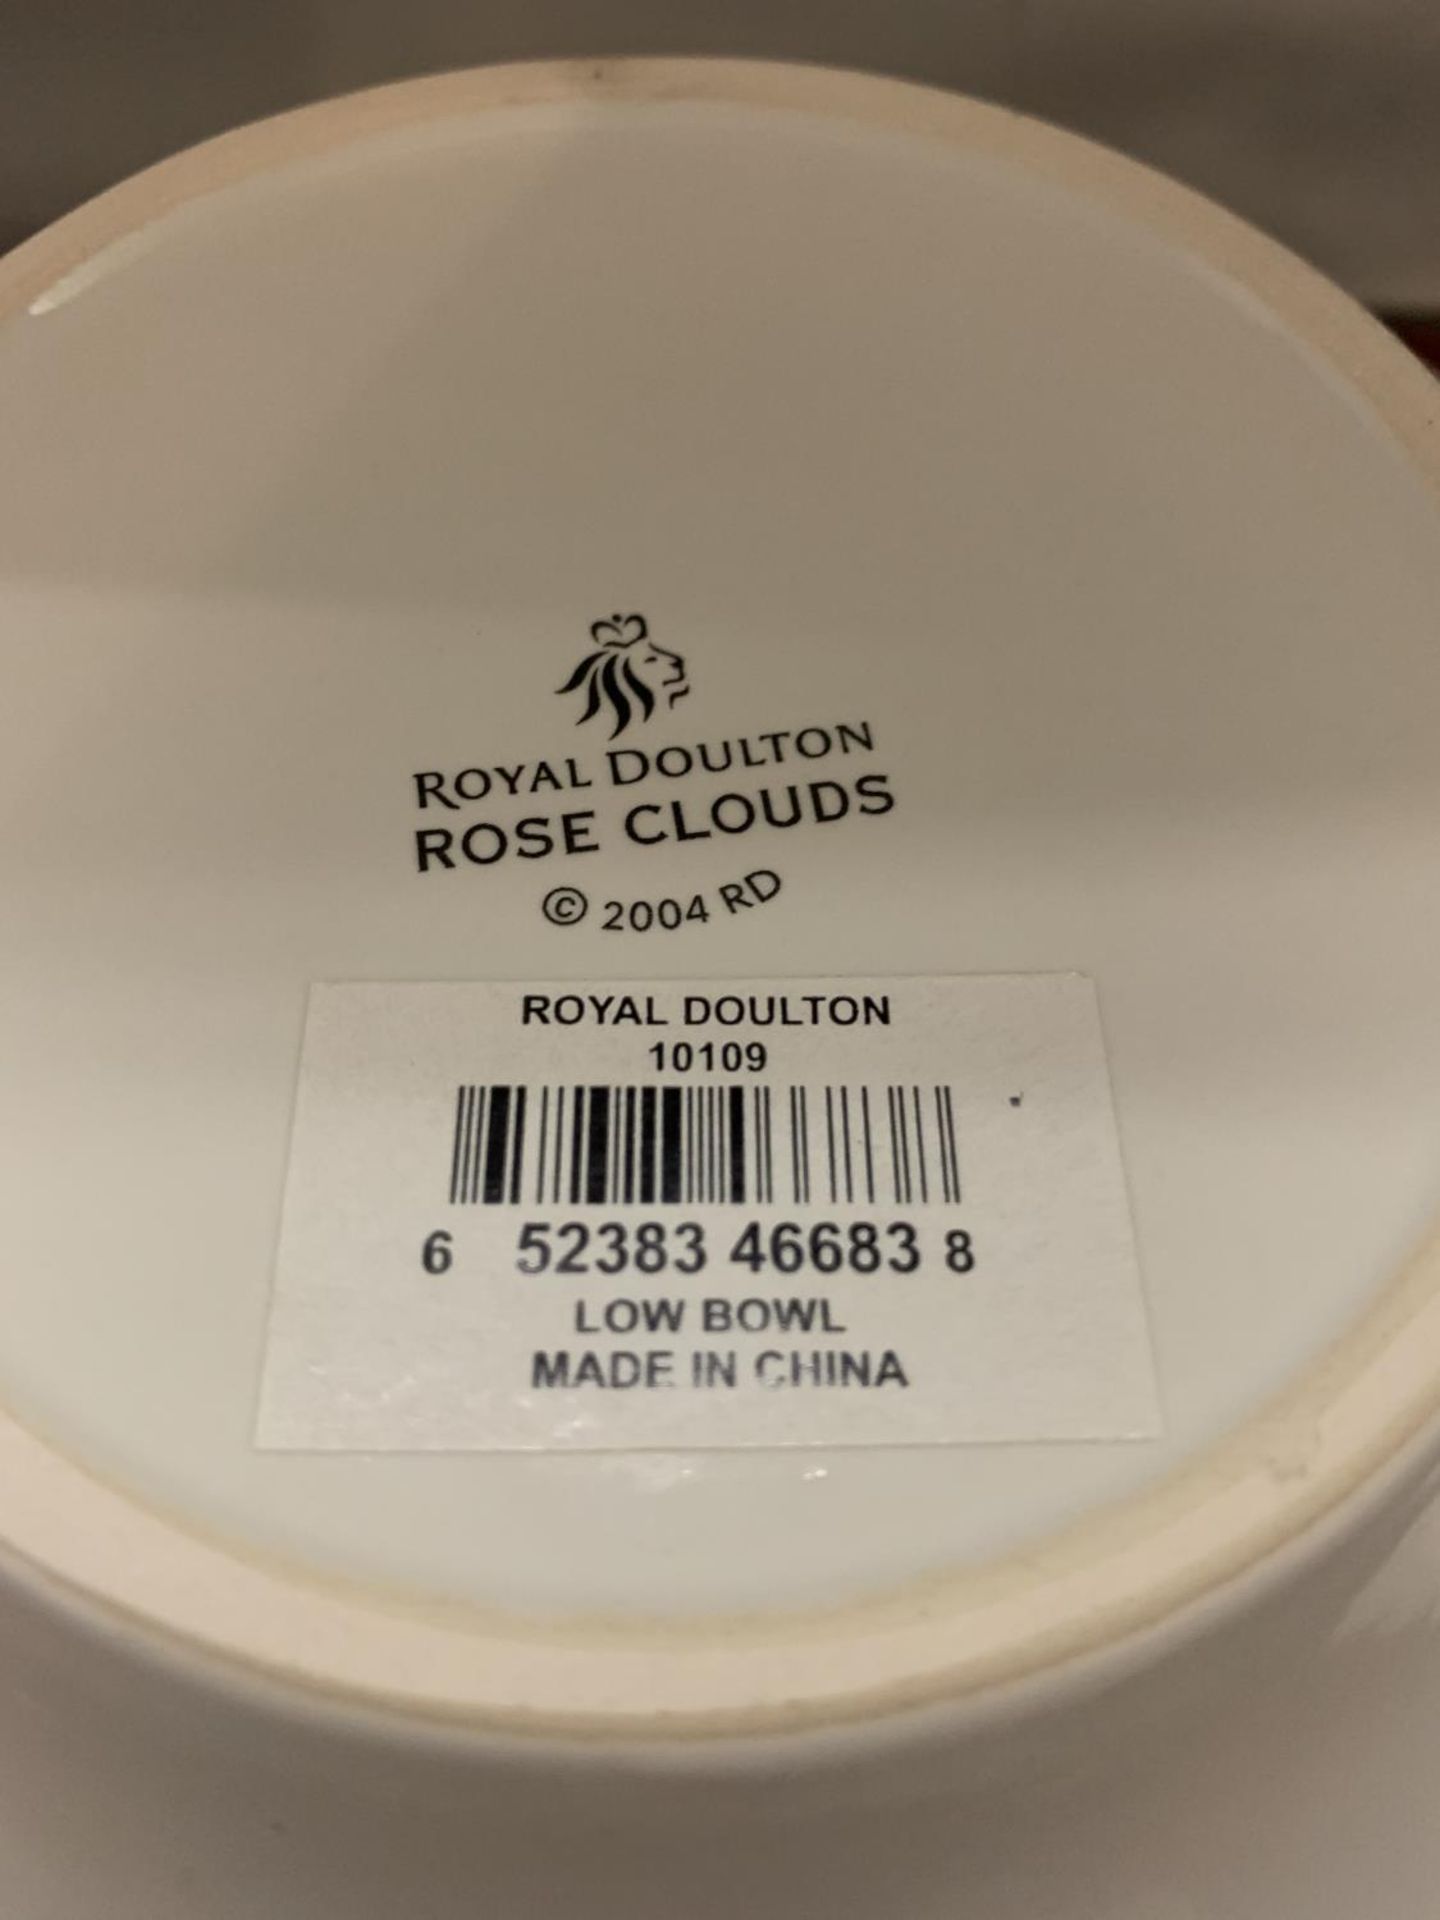 A ROYAL DOULTON ROSE CLOUDS LOW BOWL IN A PRESENTATION BOX - Image 5 of 6